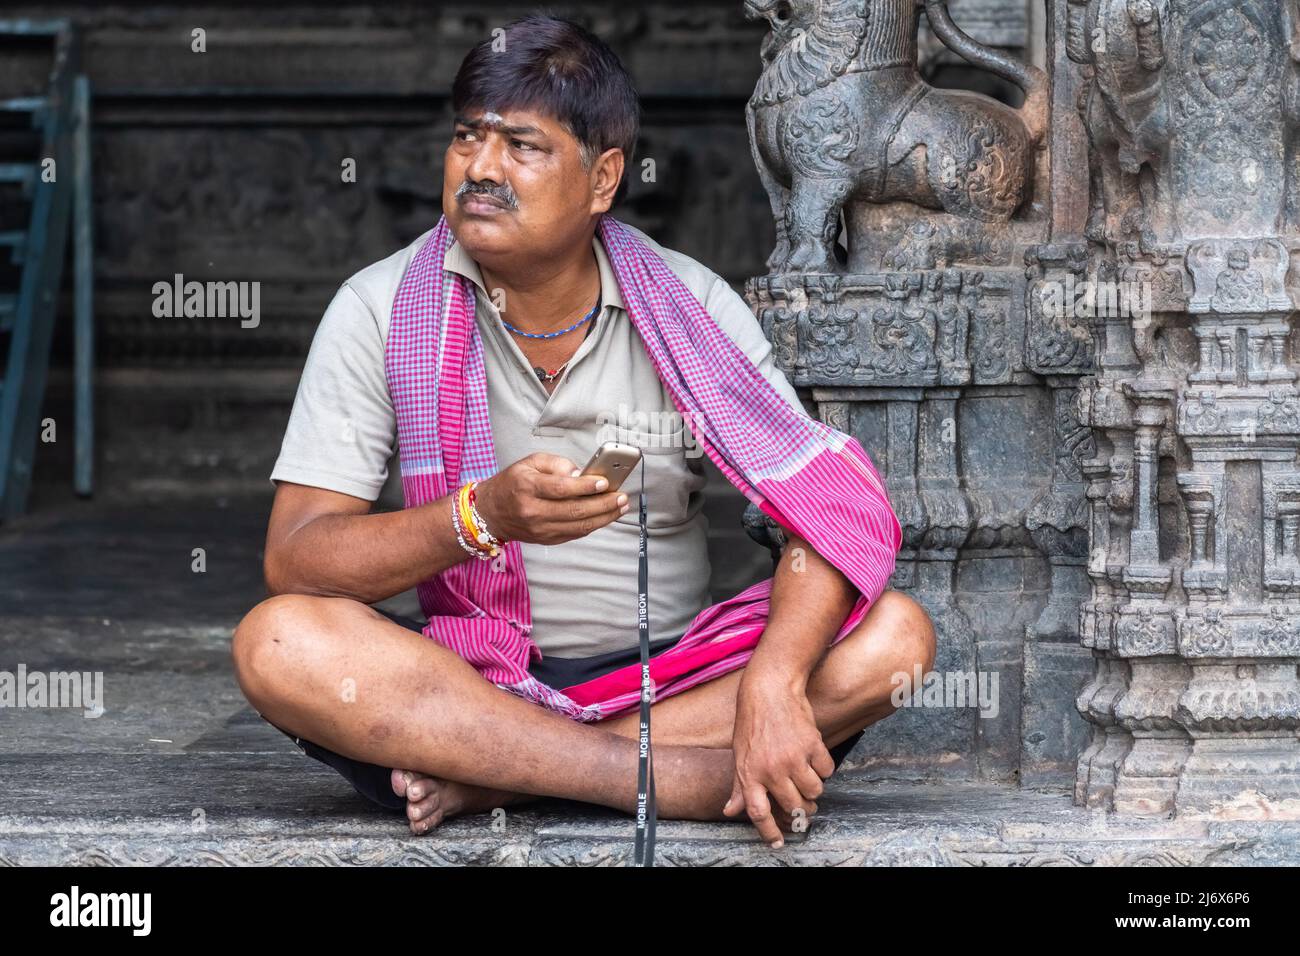 Vellore, Tamil Nadu, India - September 2018: An Indian man wearing a red stole sitting cross legged at an ancient Hindu temple in the Vellore fort. Stock Photo